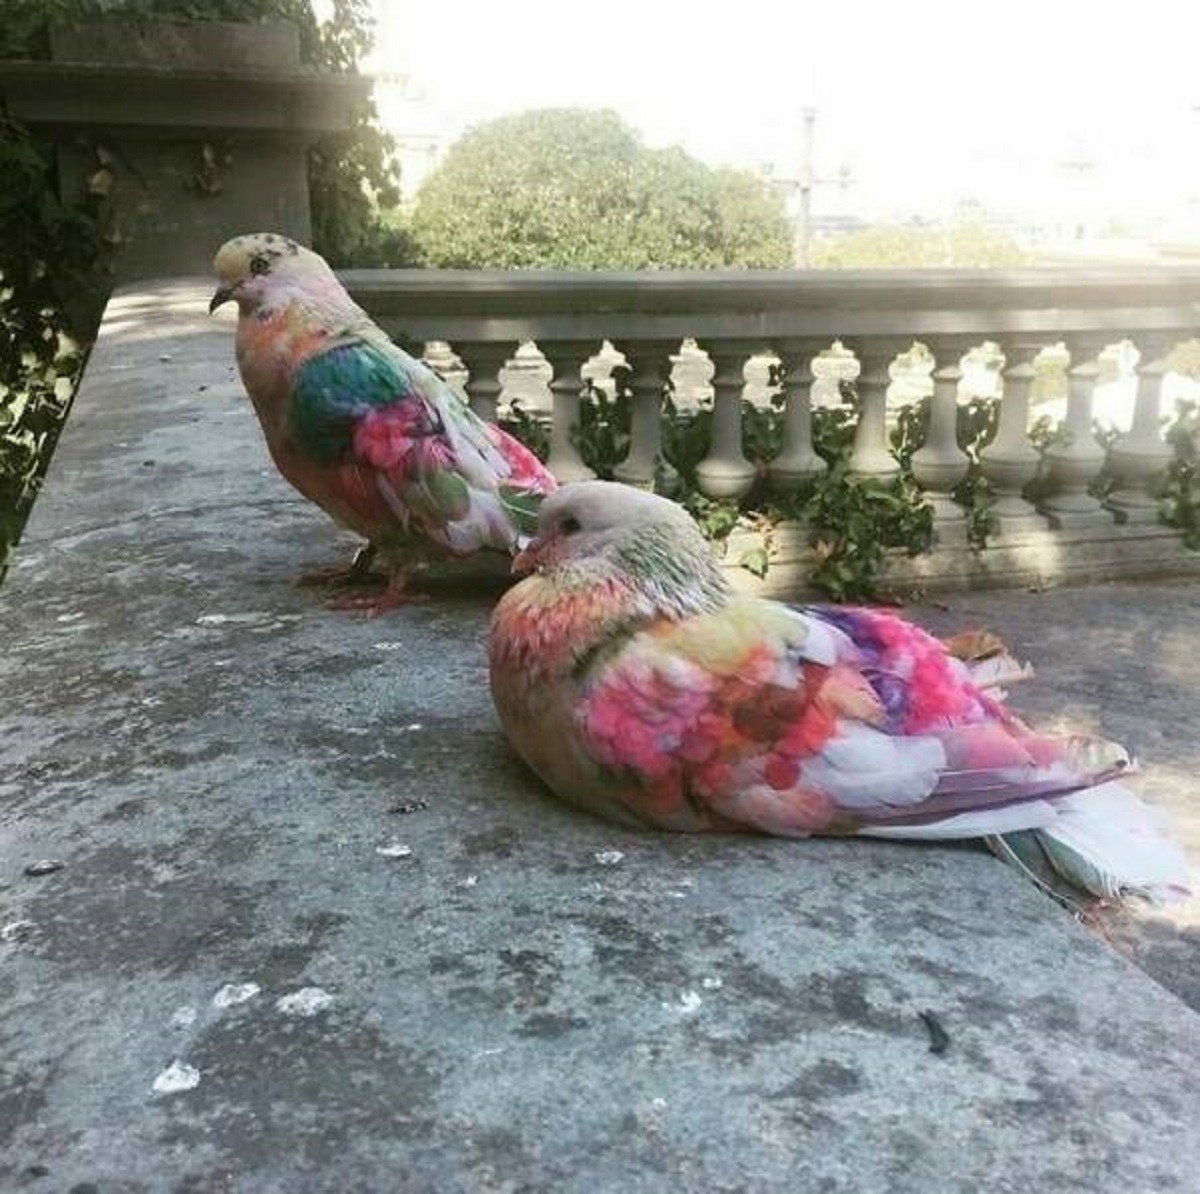 "Colored Racing Pigeons From The Murcia Region Of Spain"